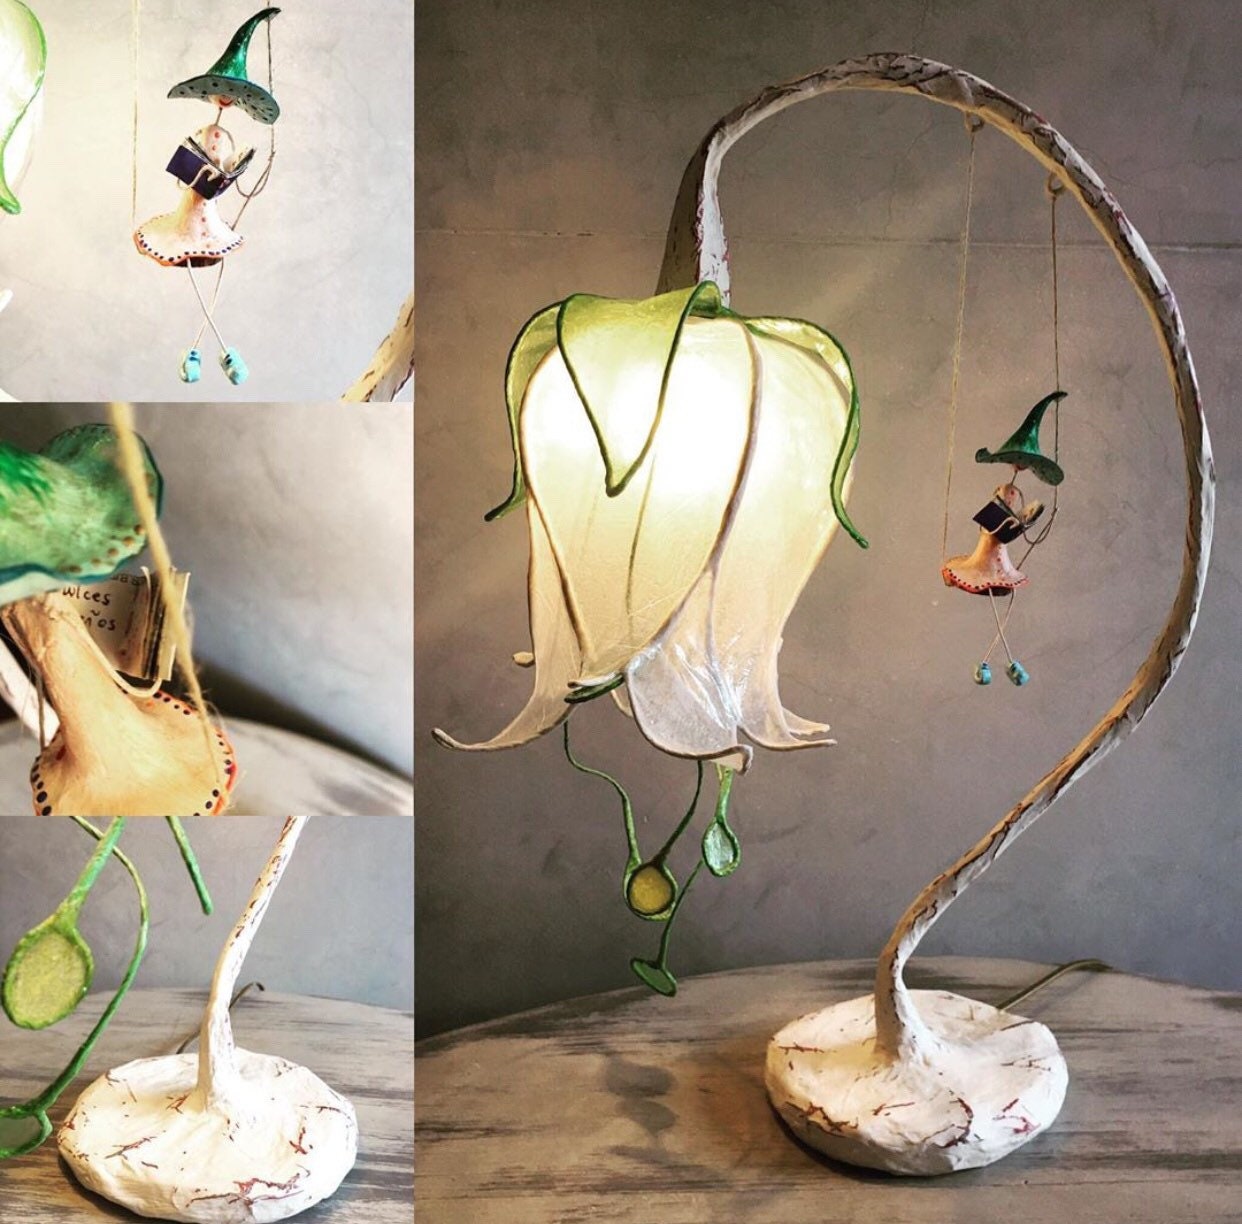 Flower Lamp With Fairy on Swing. Magic Lamp. Unique Design. - Etsy